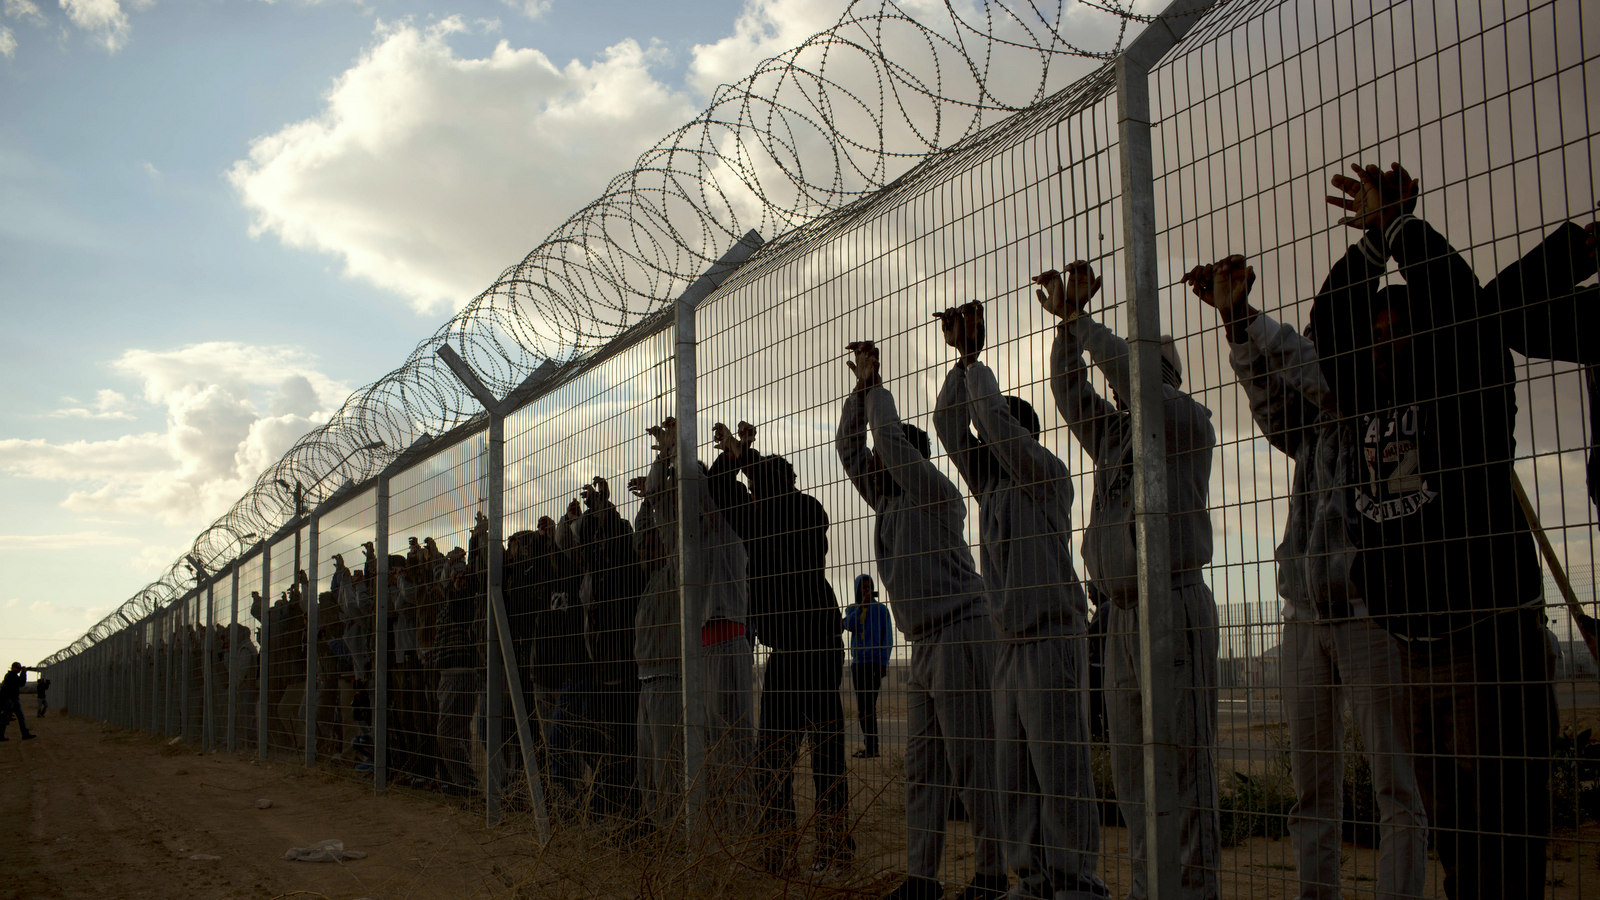 African migrants stands inside Holot detention center as others protest outside against the detention center near Ktsiot the Negev Desert in southern Israel, Monday, Feb. 17, 2014. (AP Photo/Oded Balilty)